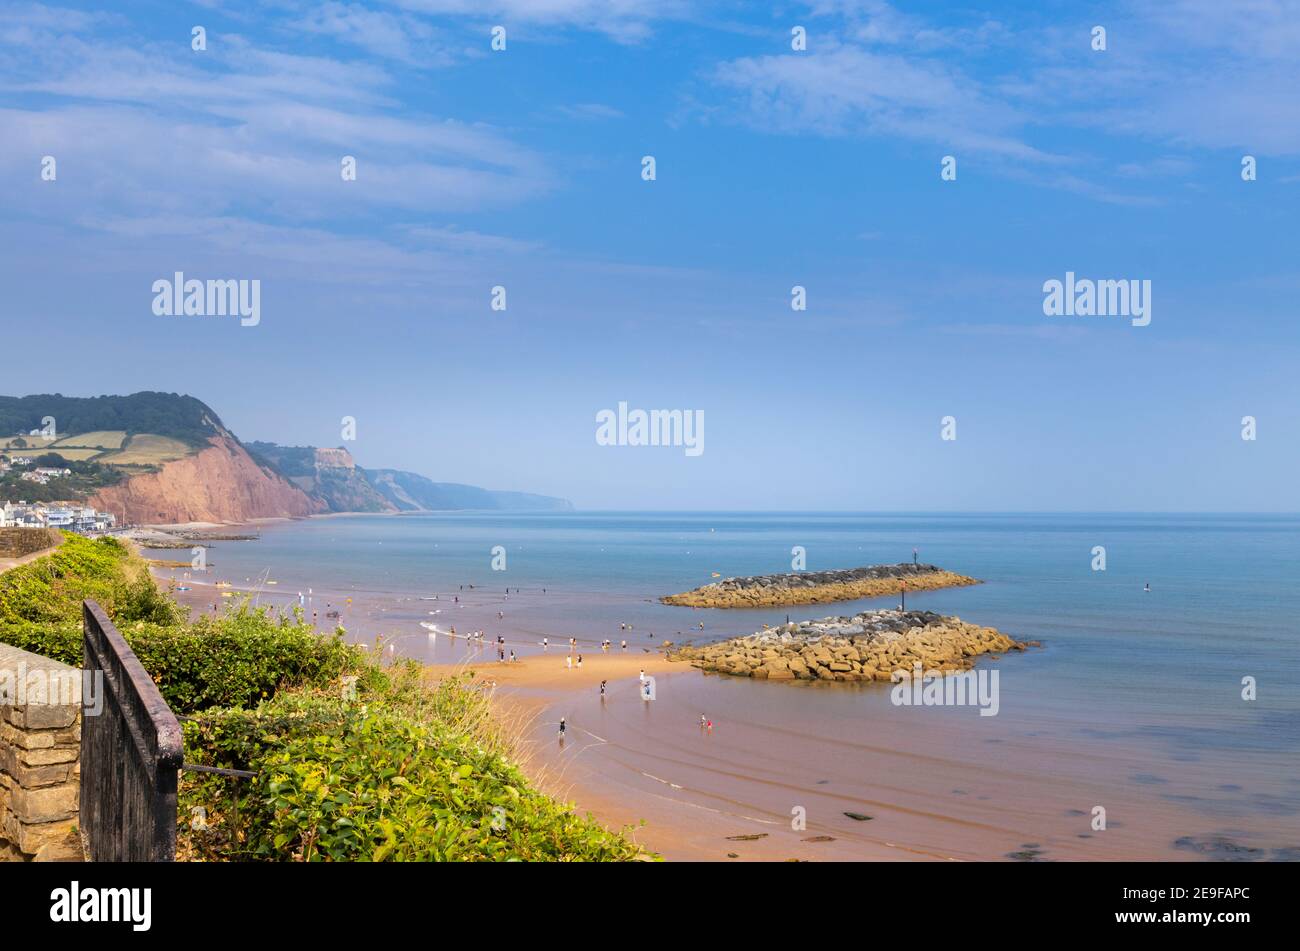 The sandy beach and rocky islands looking east at Sidmouth, a Devon coastal town on the Jurassic Coast World Heritage Site at low tide on a sunny day Stock Photo